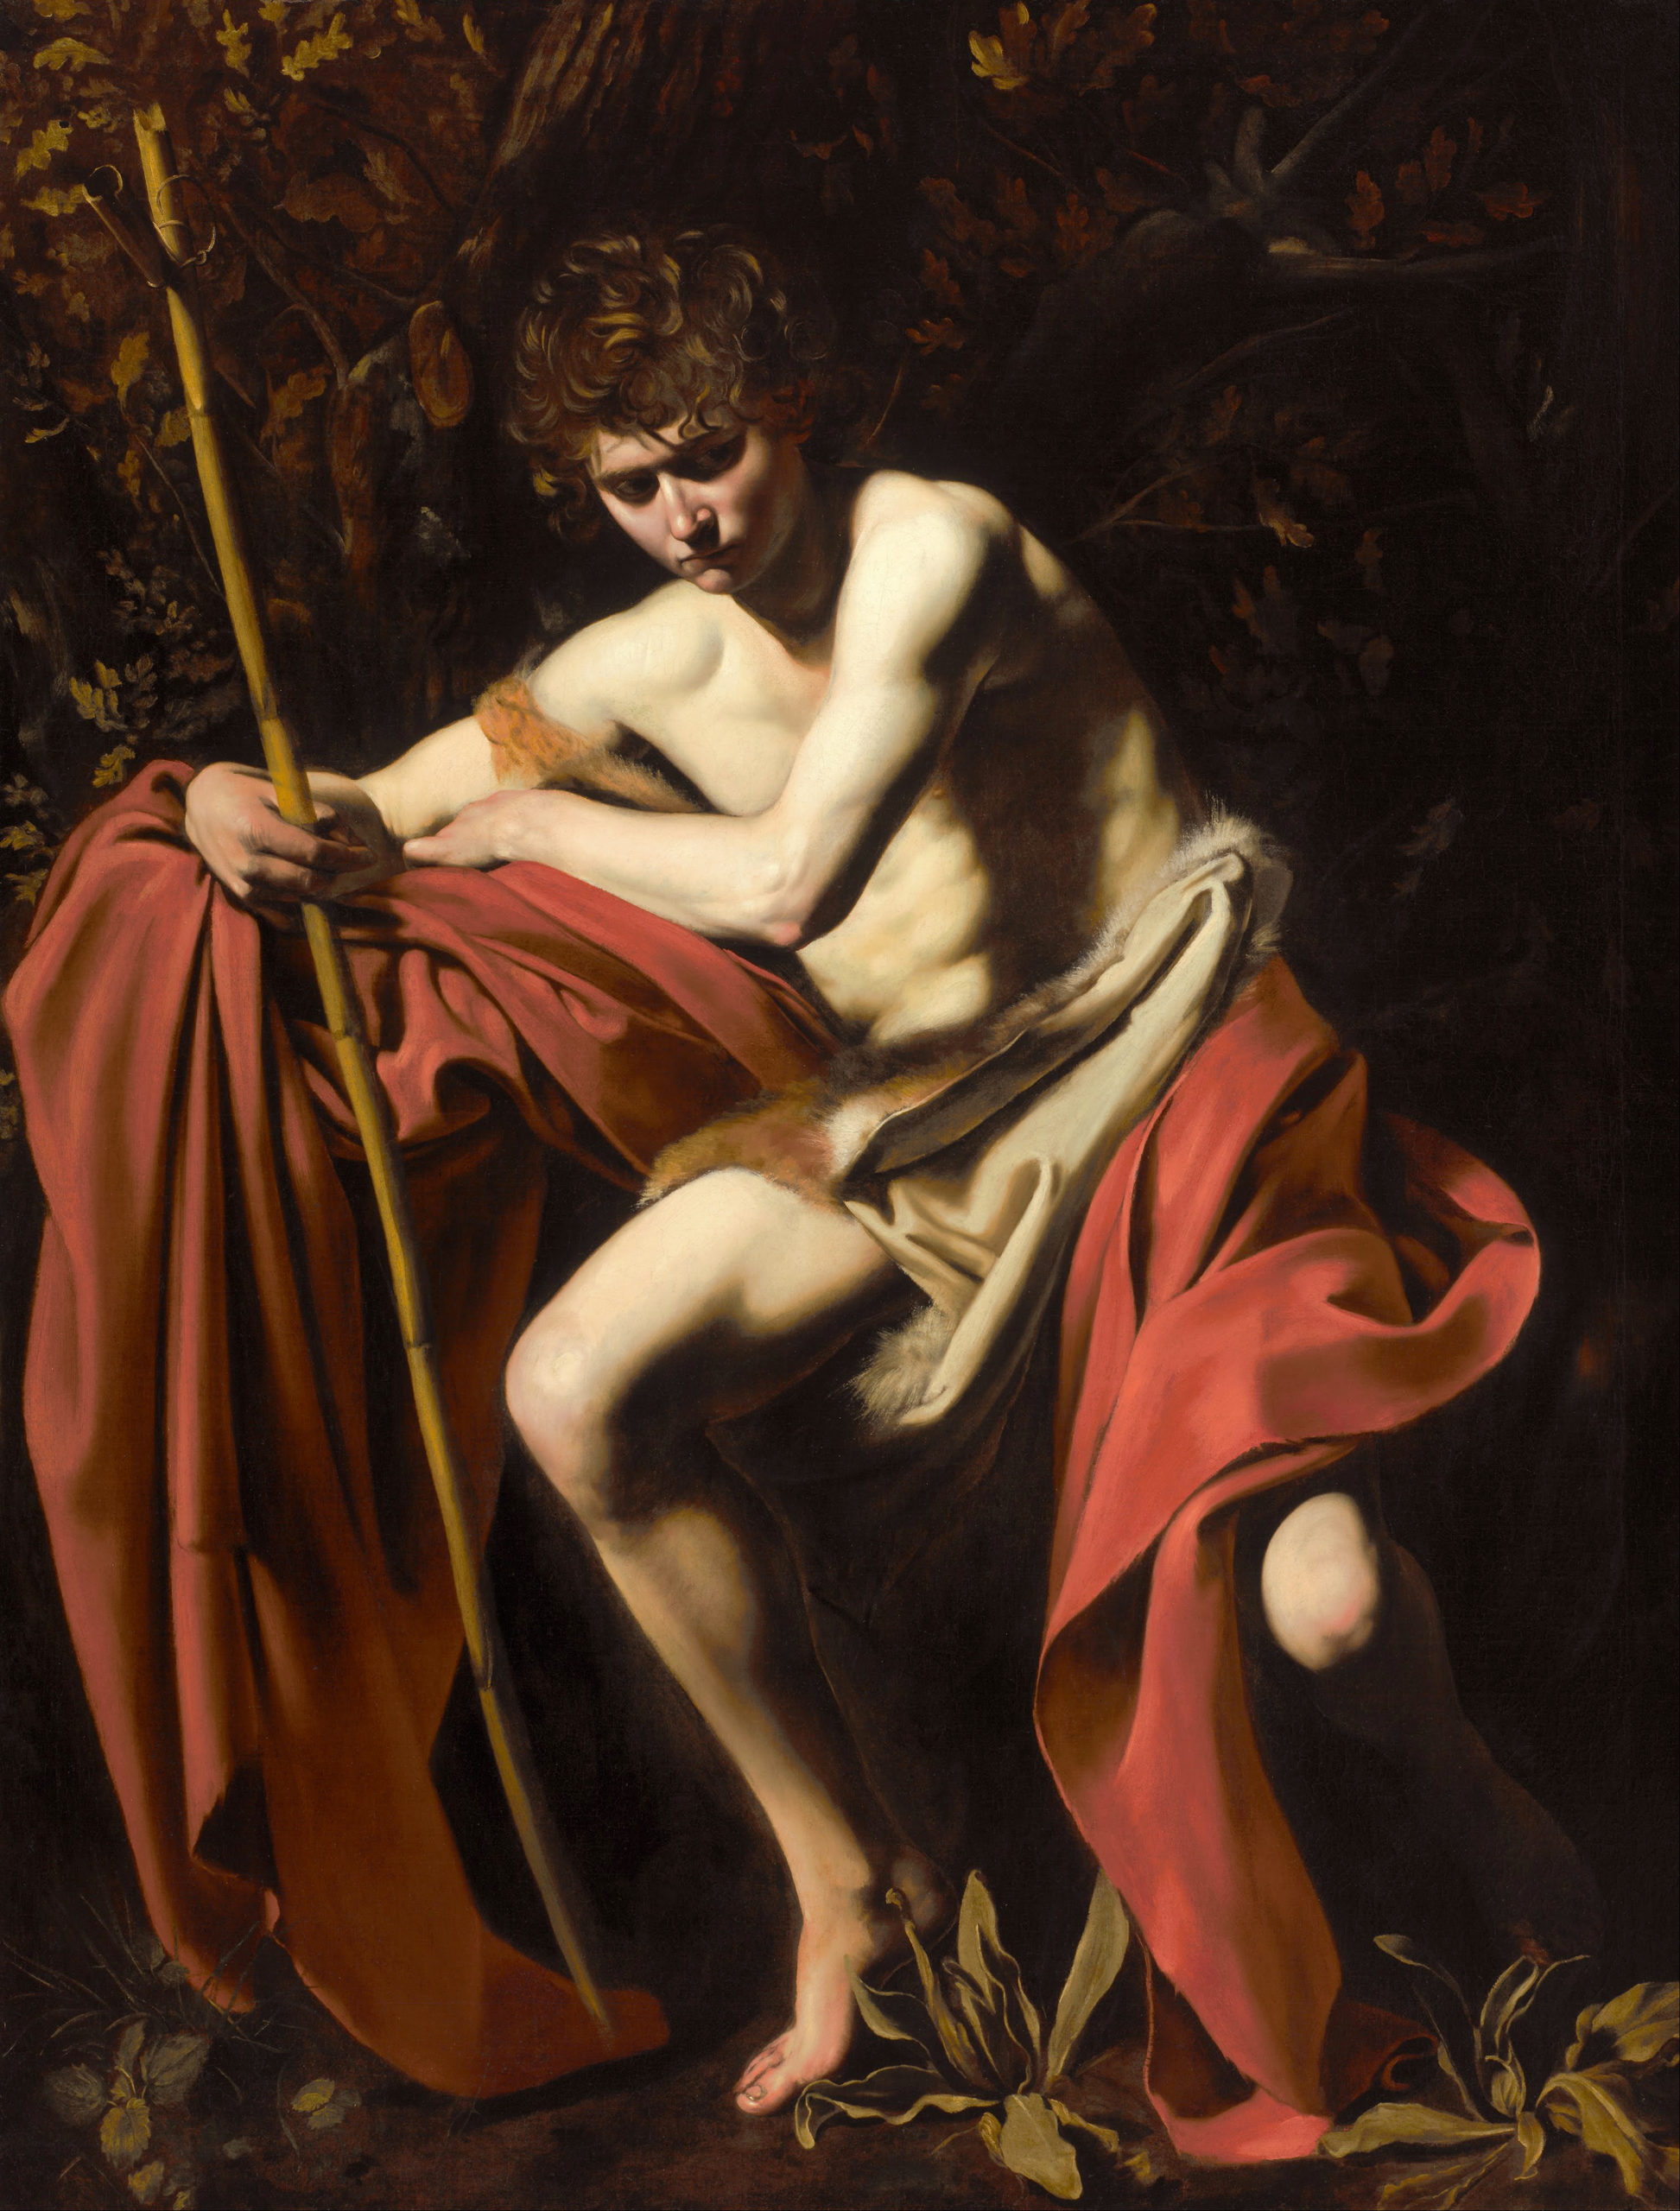 Caravaggio, Saint John the Baptist in the Wilderness, 1604, oil on canvas, 172.72 x 132.08 cm (The Nelson-Atkins Museum of Art)